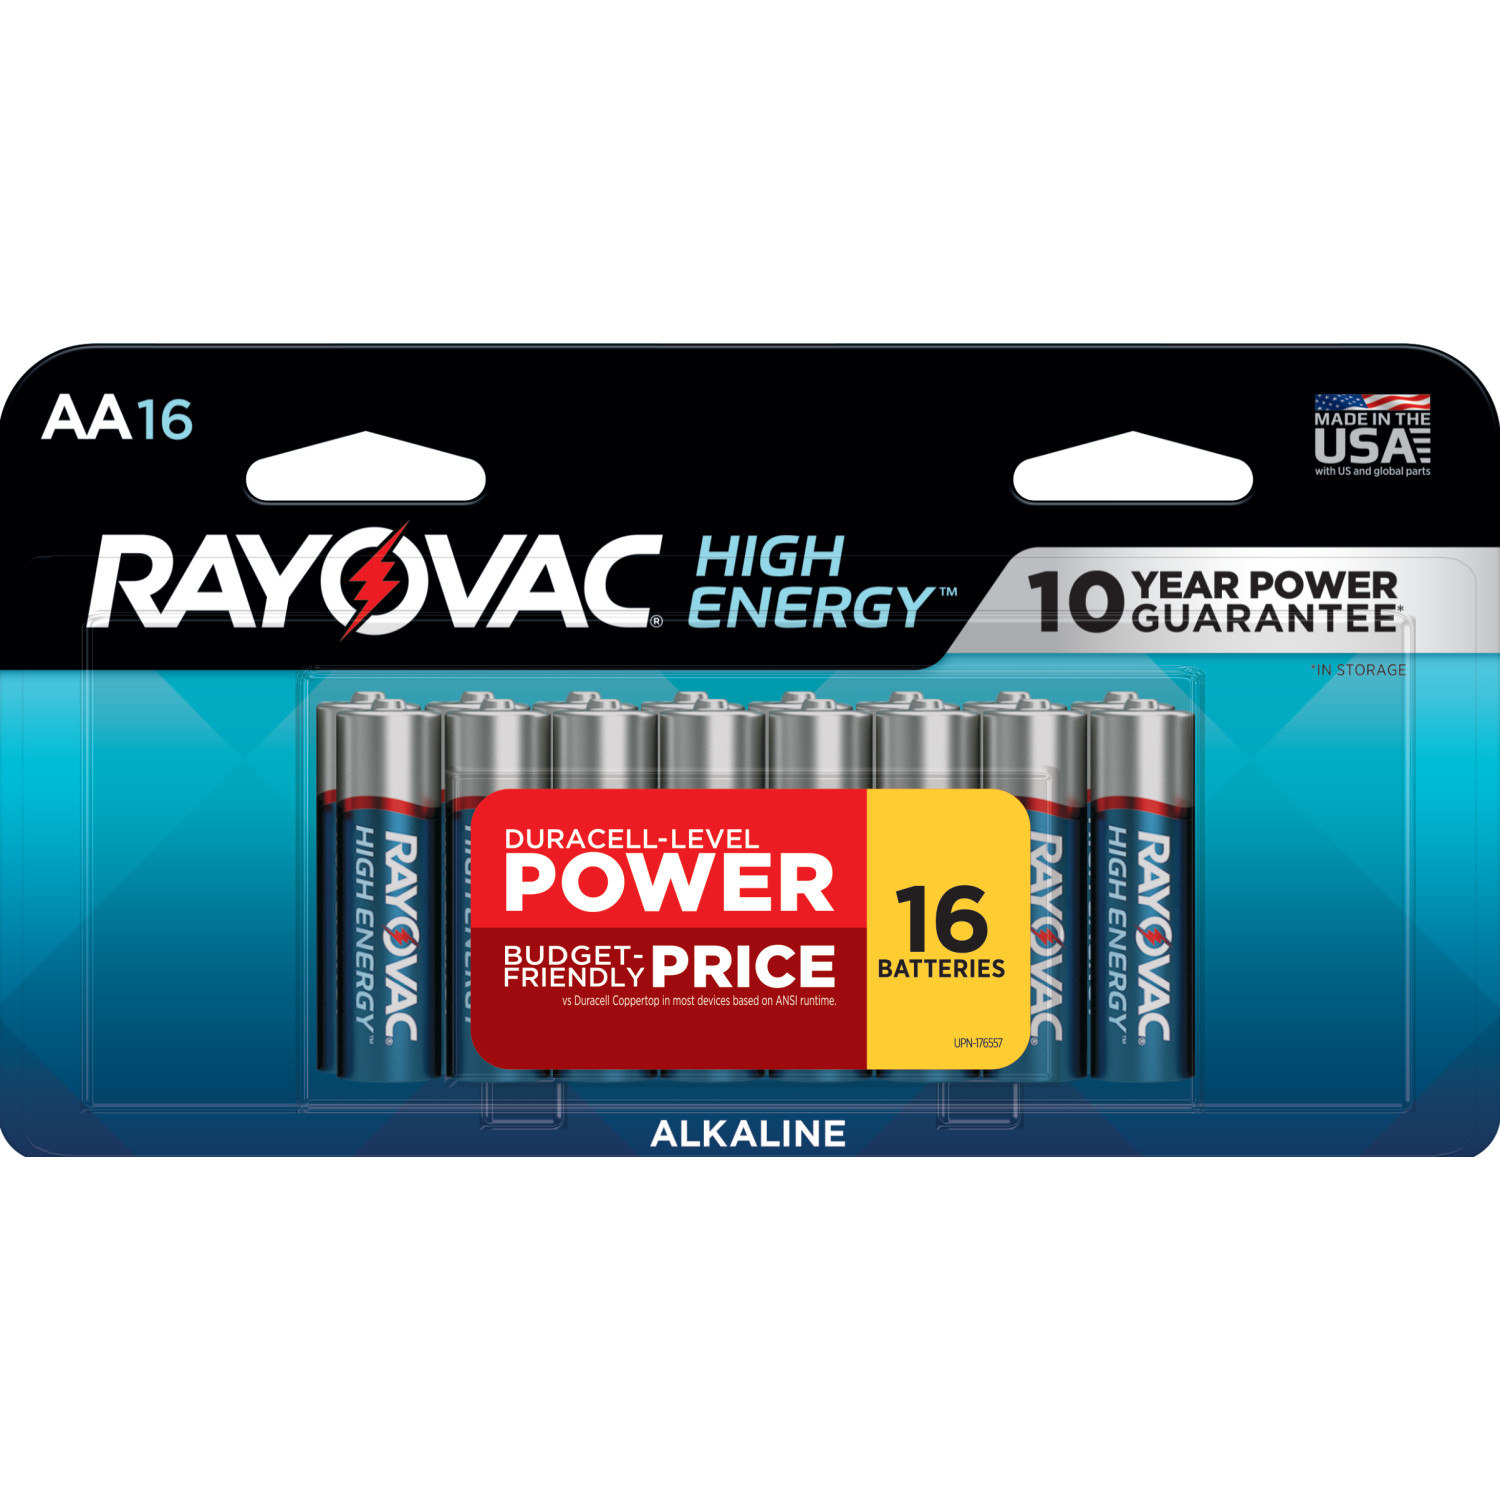 Customer Reviews: Rayovac High Energy AA Batteries (16 Pack), Double A ...